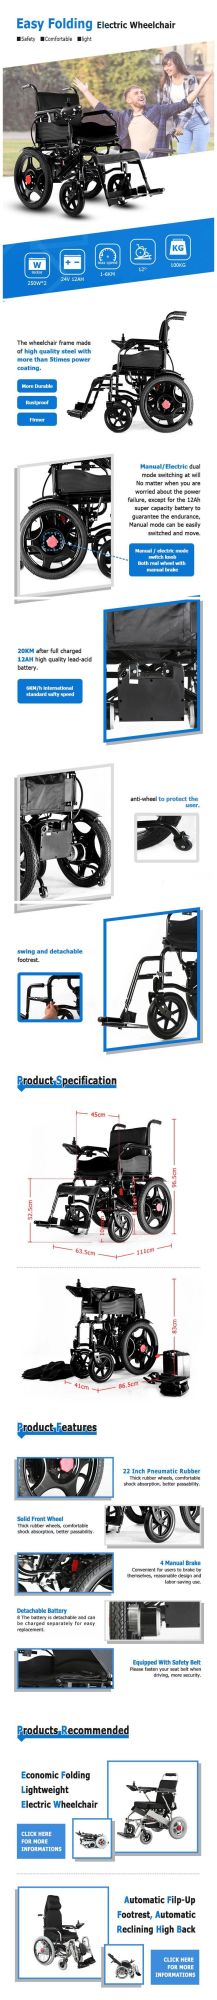 Electric Wheelchair with Steel with Liquid Painting New Style Wheelchair Can Easy Fold